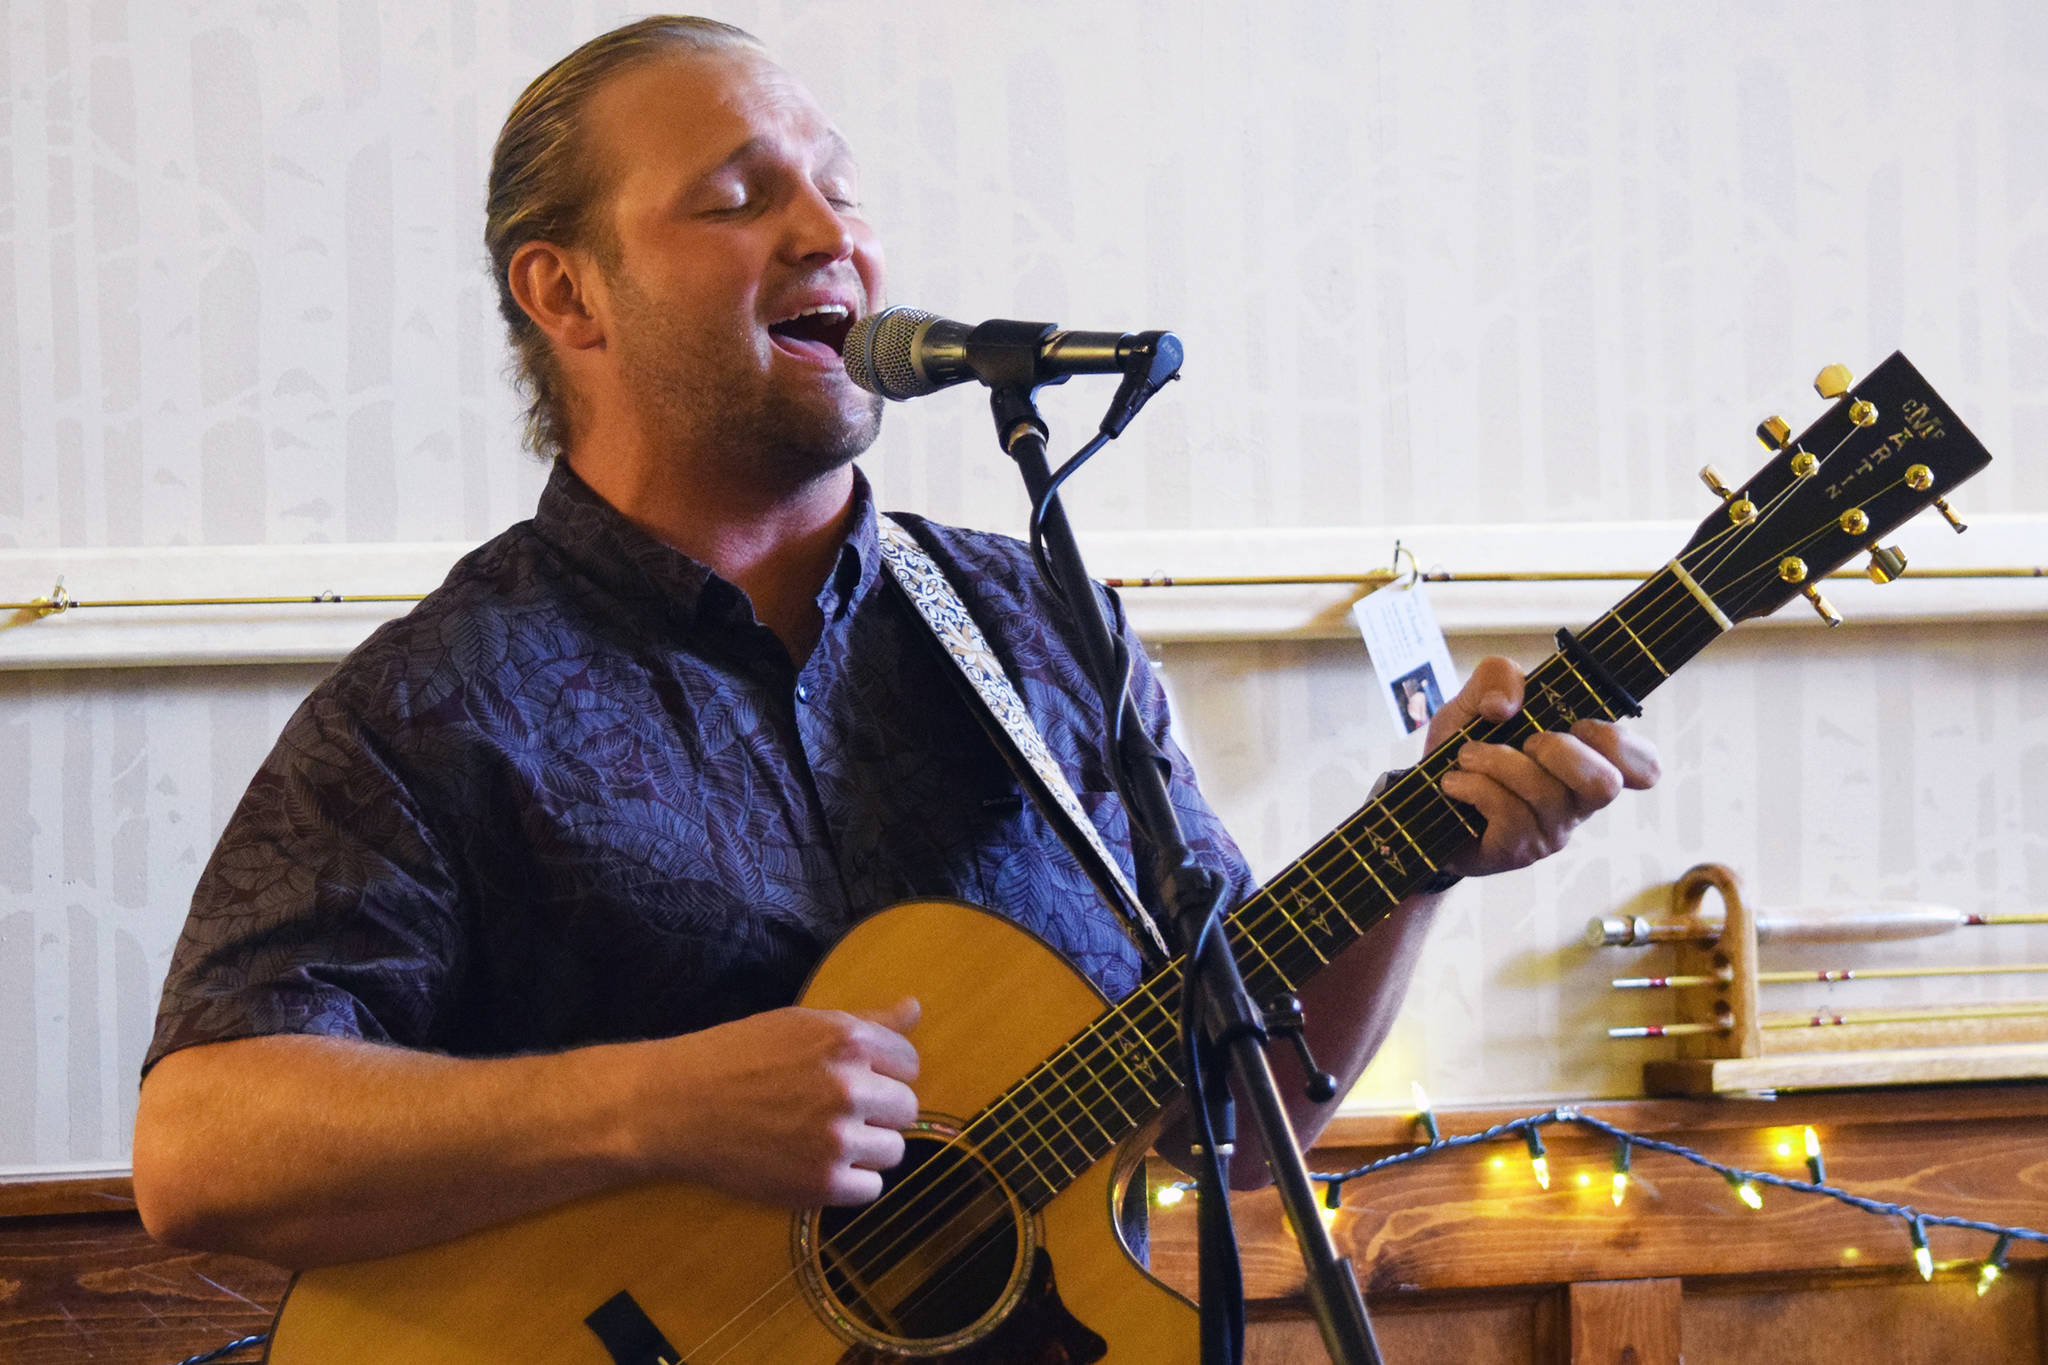 Curtiss O’Rorke Stedman, who performs as Cousin Curtiss, plays guitar at the Rookery Cafe, Wednesday, May 29, 2019. (Ben Hohenstatt | Capital City Weekly)